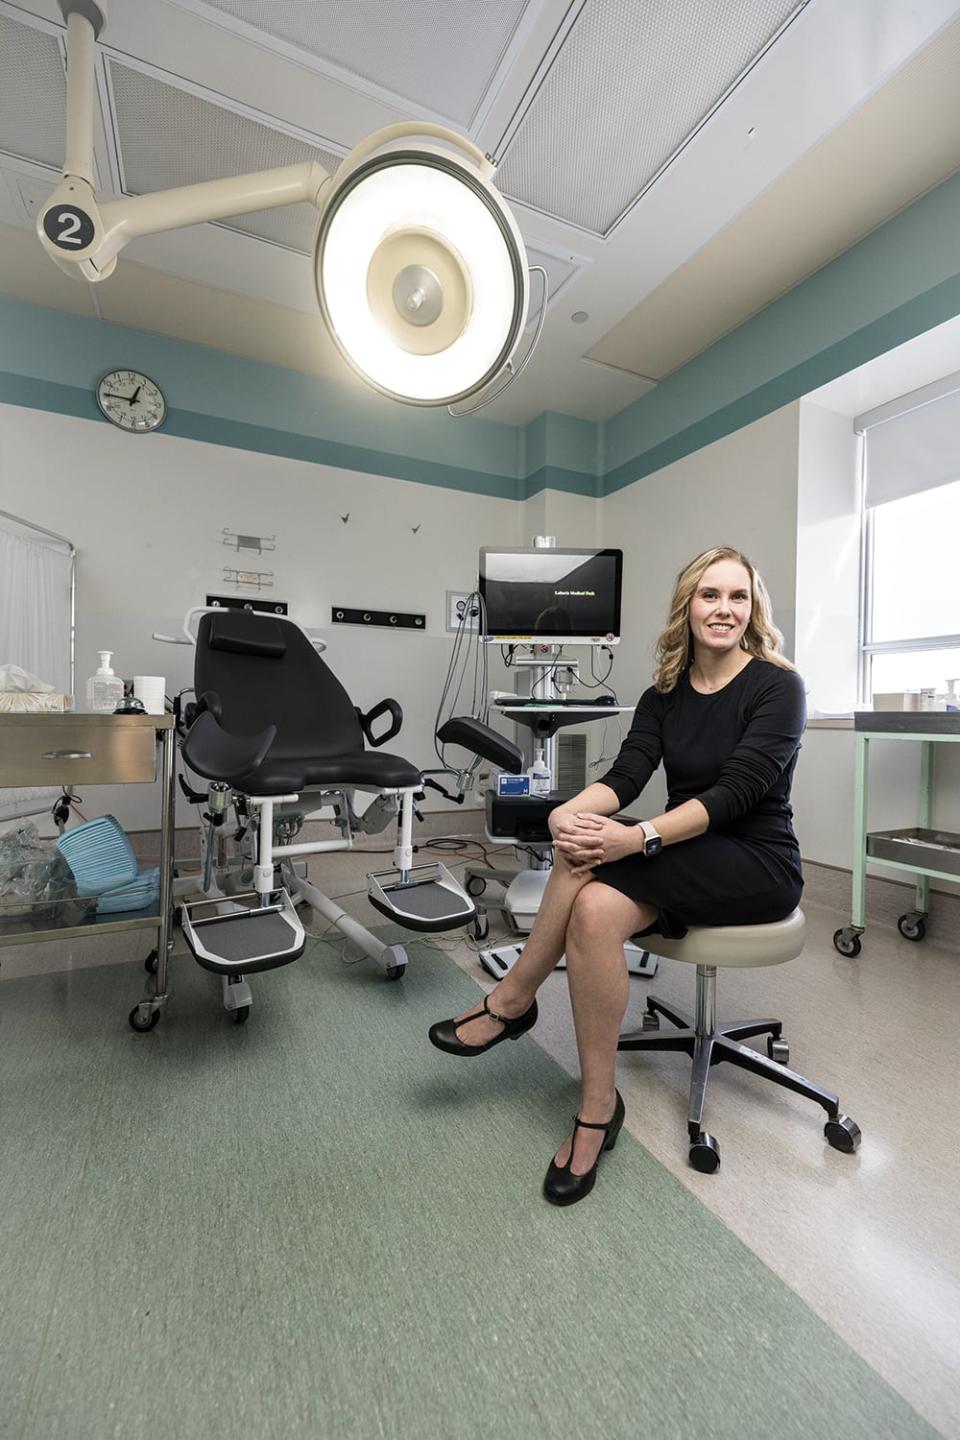 Dr. Erin Brennand is a urogynecologist and department head, Obstetrics & Gynecology, University of Calgary and Alberta Health Services in the Calgary zone.